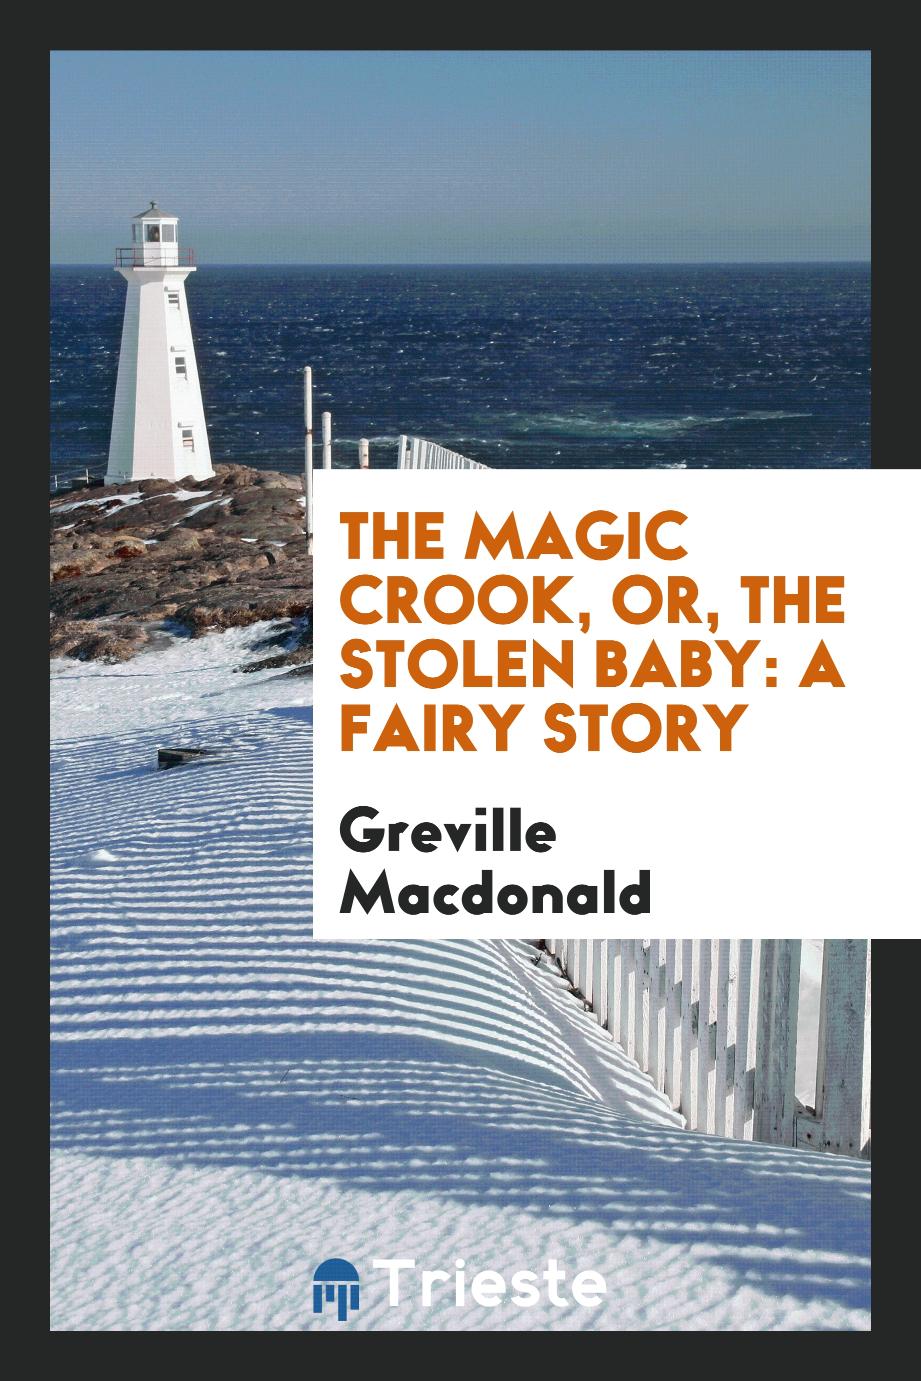 The magic crook, or, The stolen baby: a fairy story